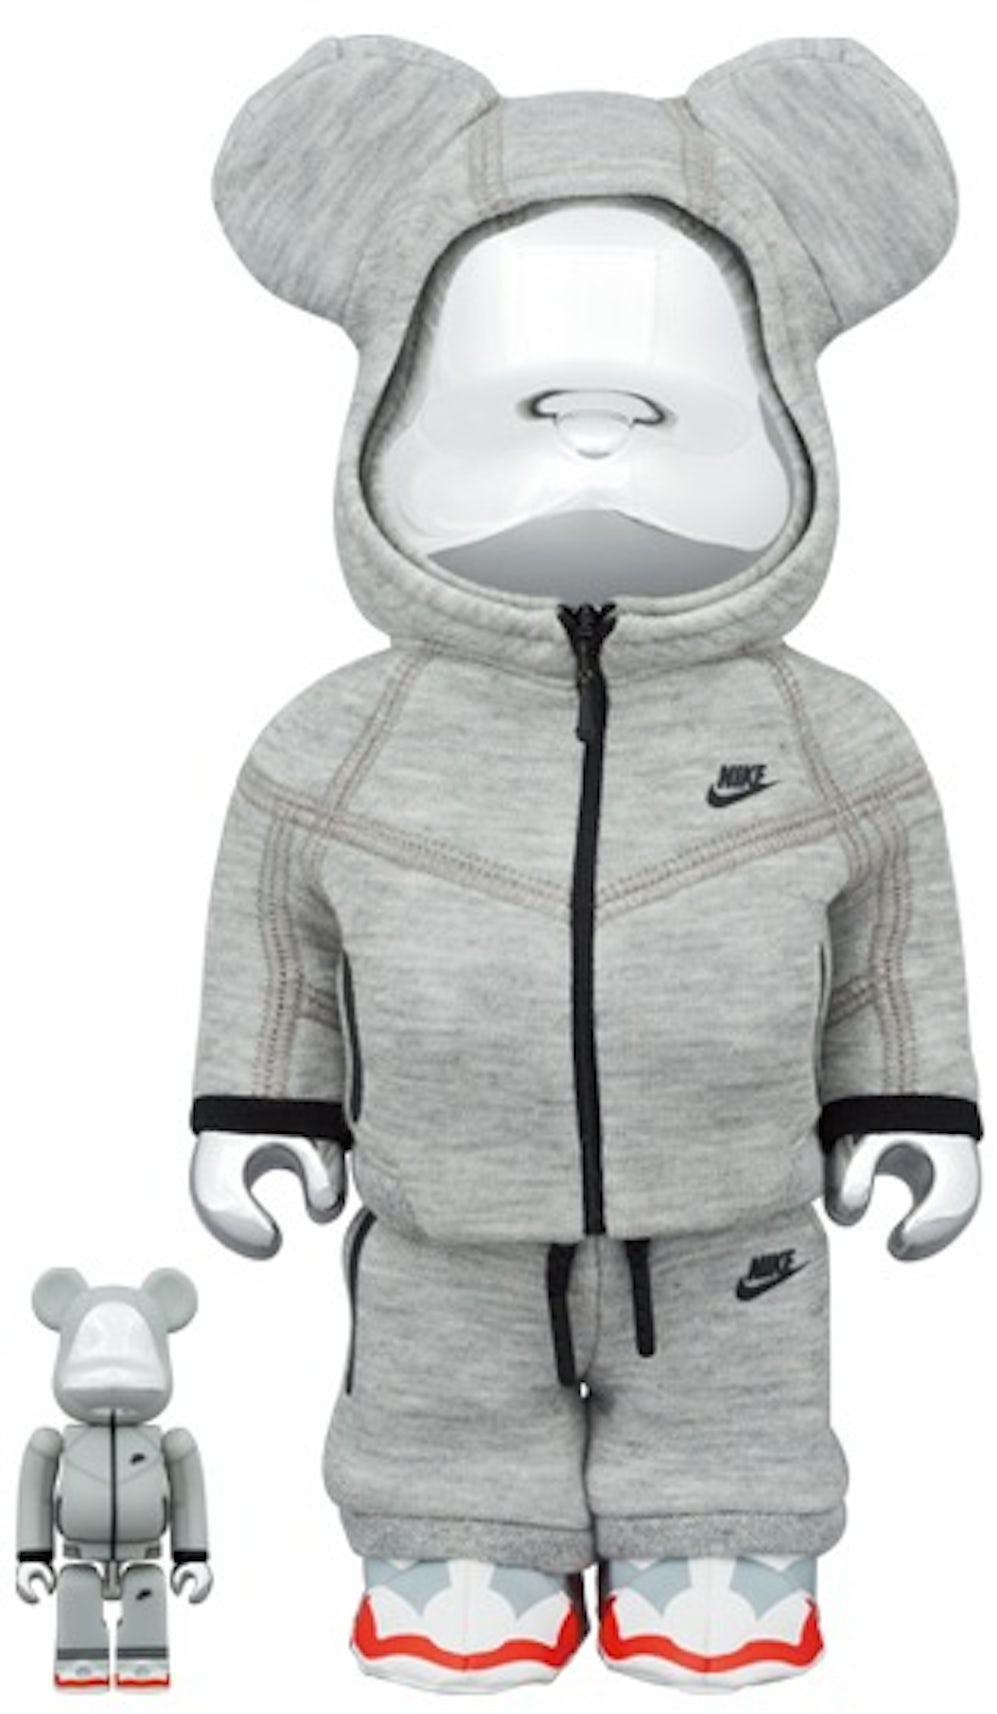 BE@RBRICK, 100%/400% Bearbrick Clot X Nike (2020), Available for Sale